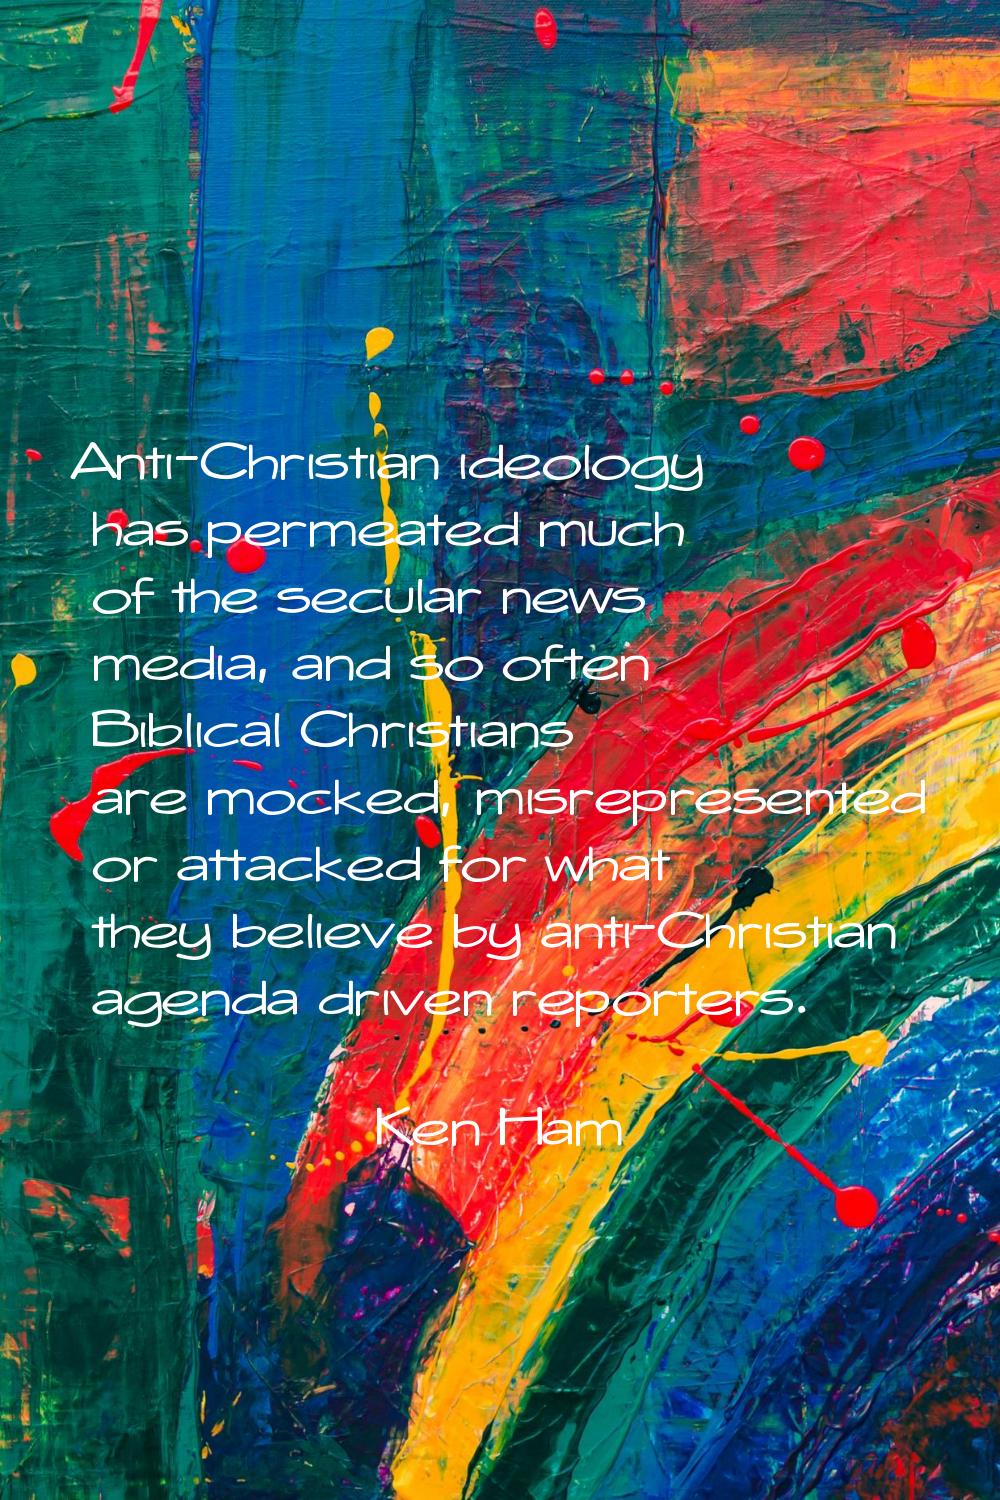 Anti-Christian ideology has permeated much of the secular news media, and so often Biblical Christi